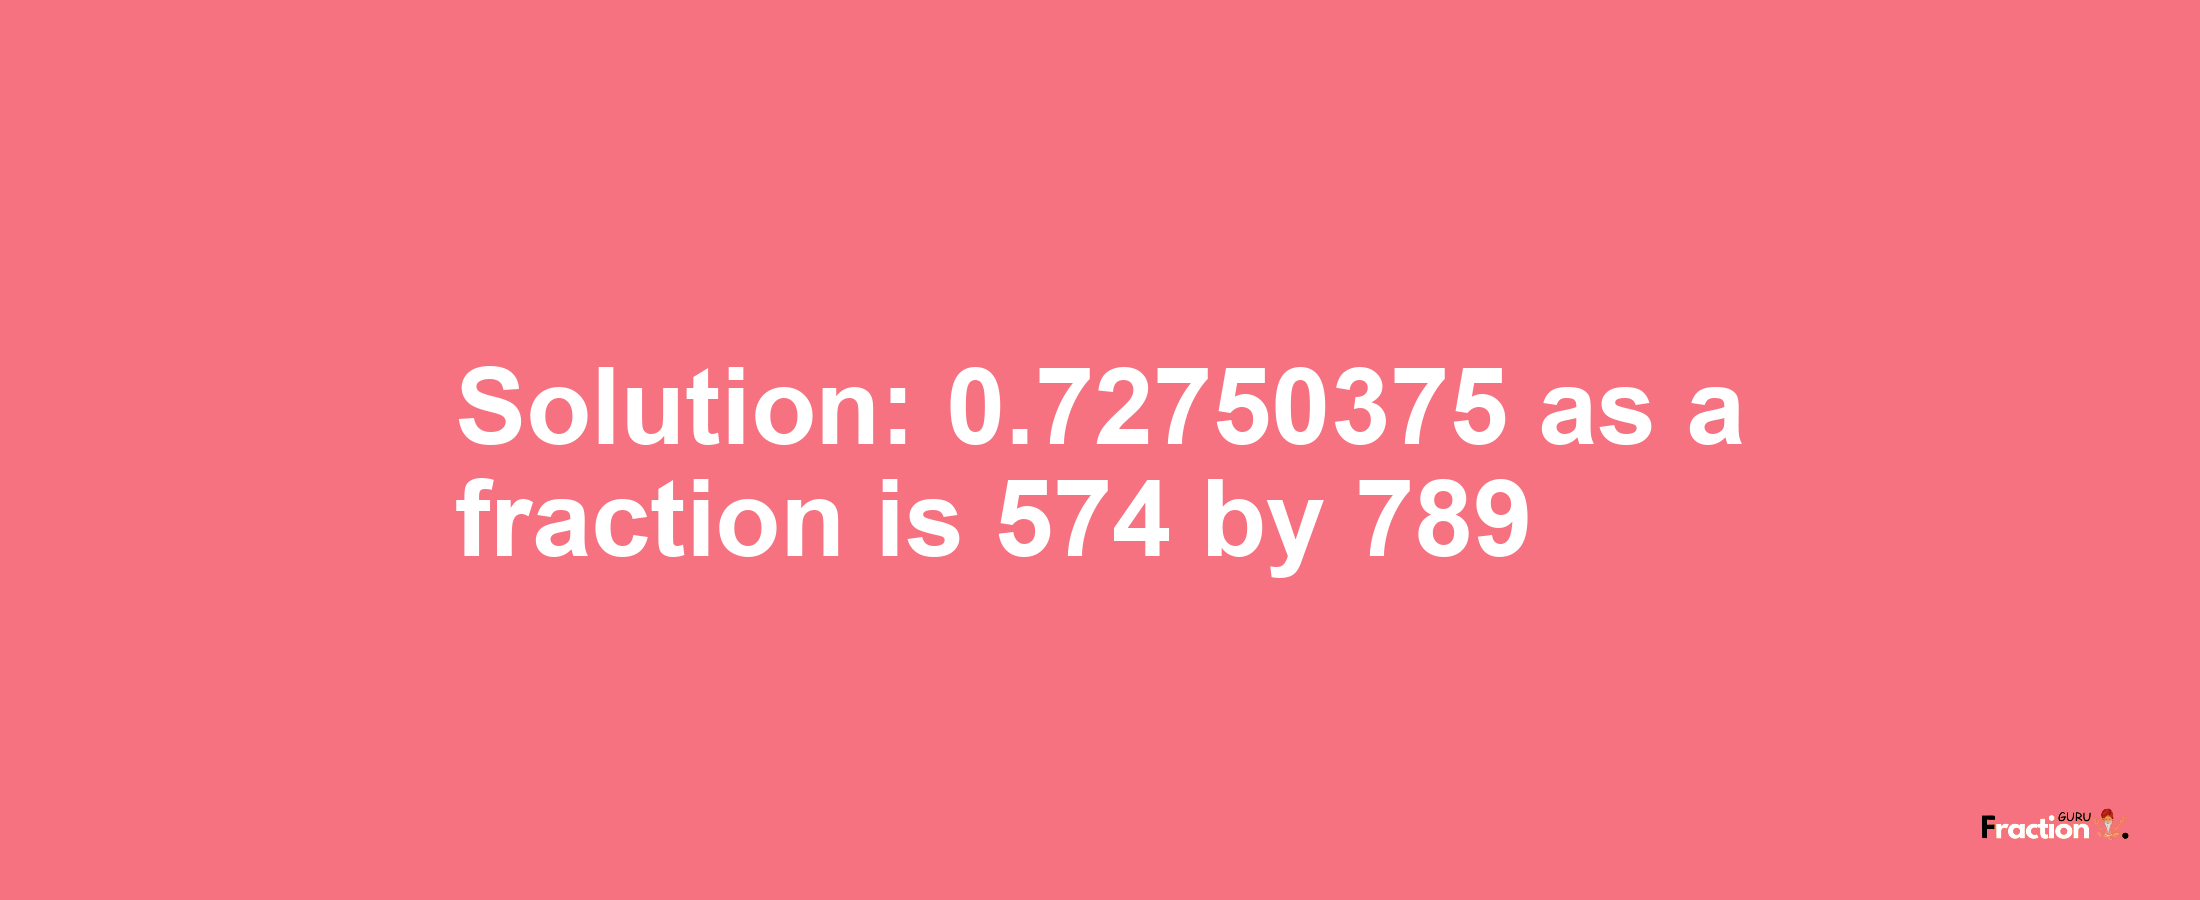 Solution:0.72750375 as a fraction is 574/789